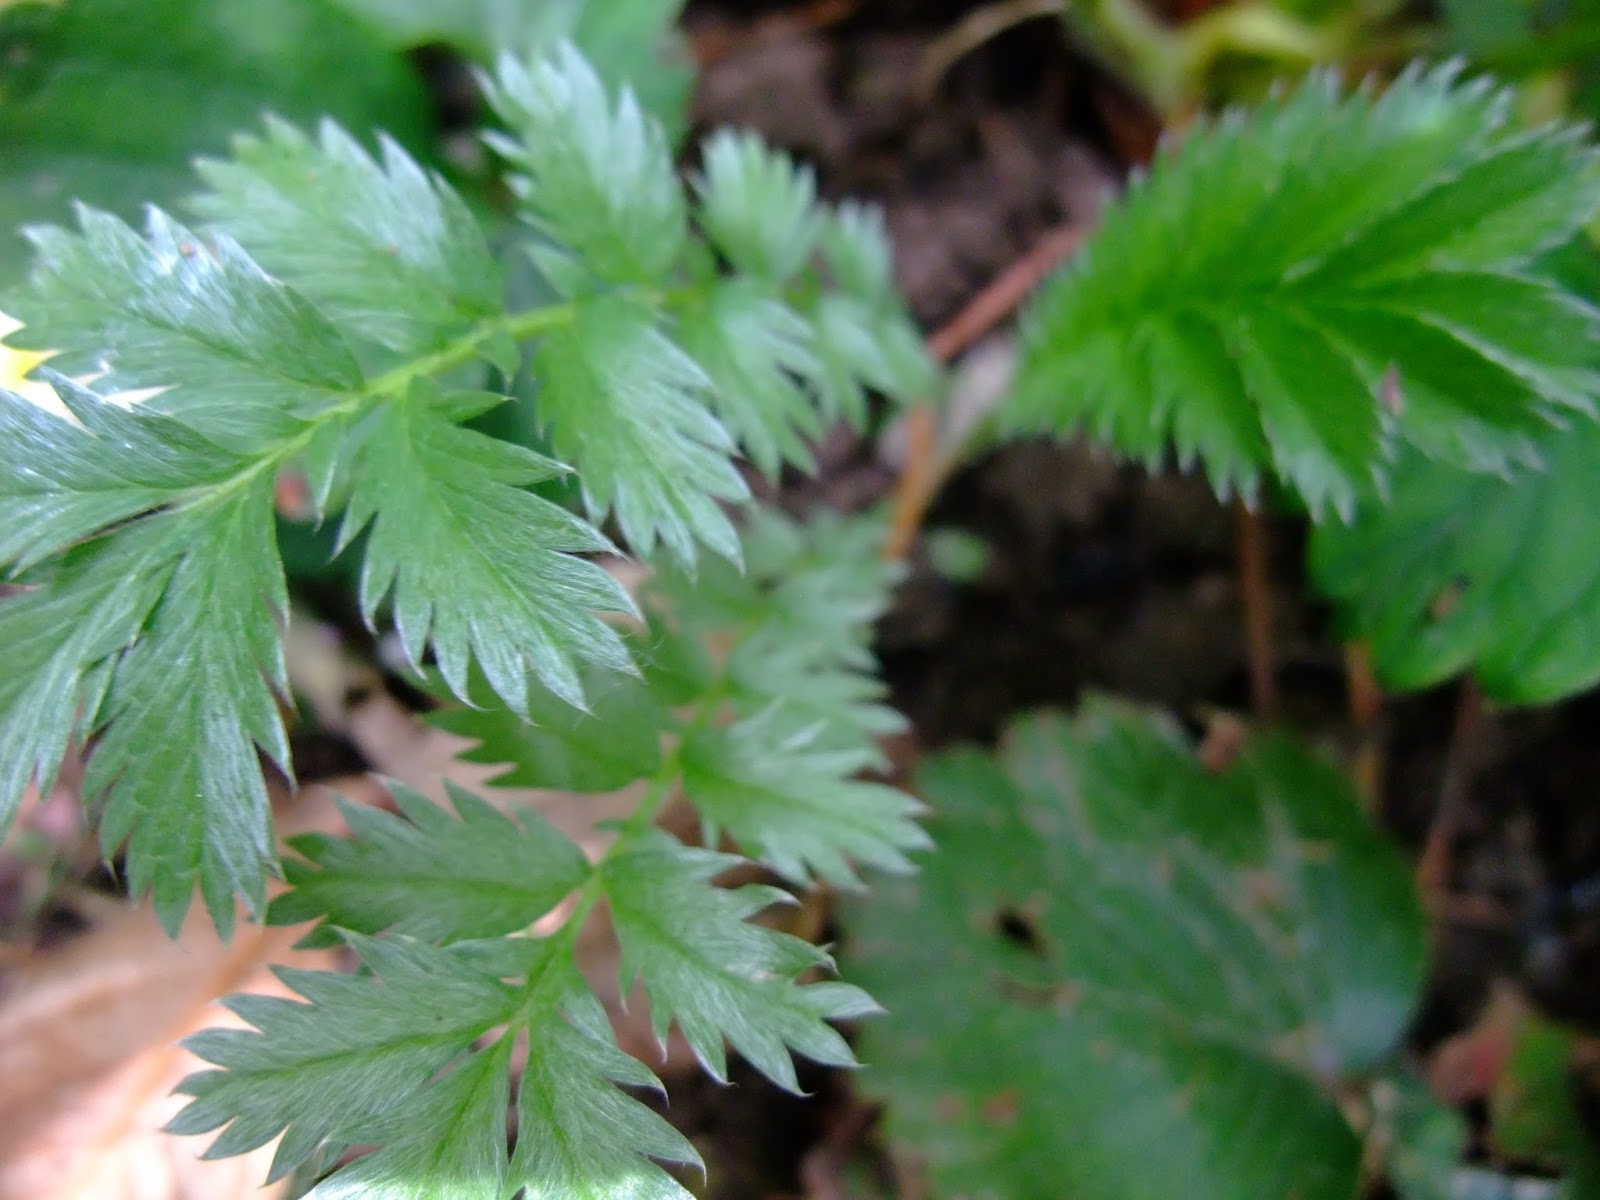 Silverweed Has The Highest Content Of Vitamin C Of All The Weeds